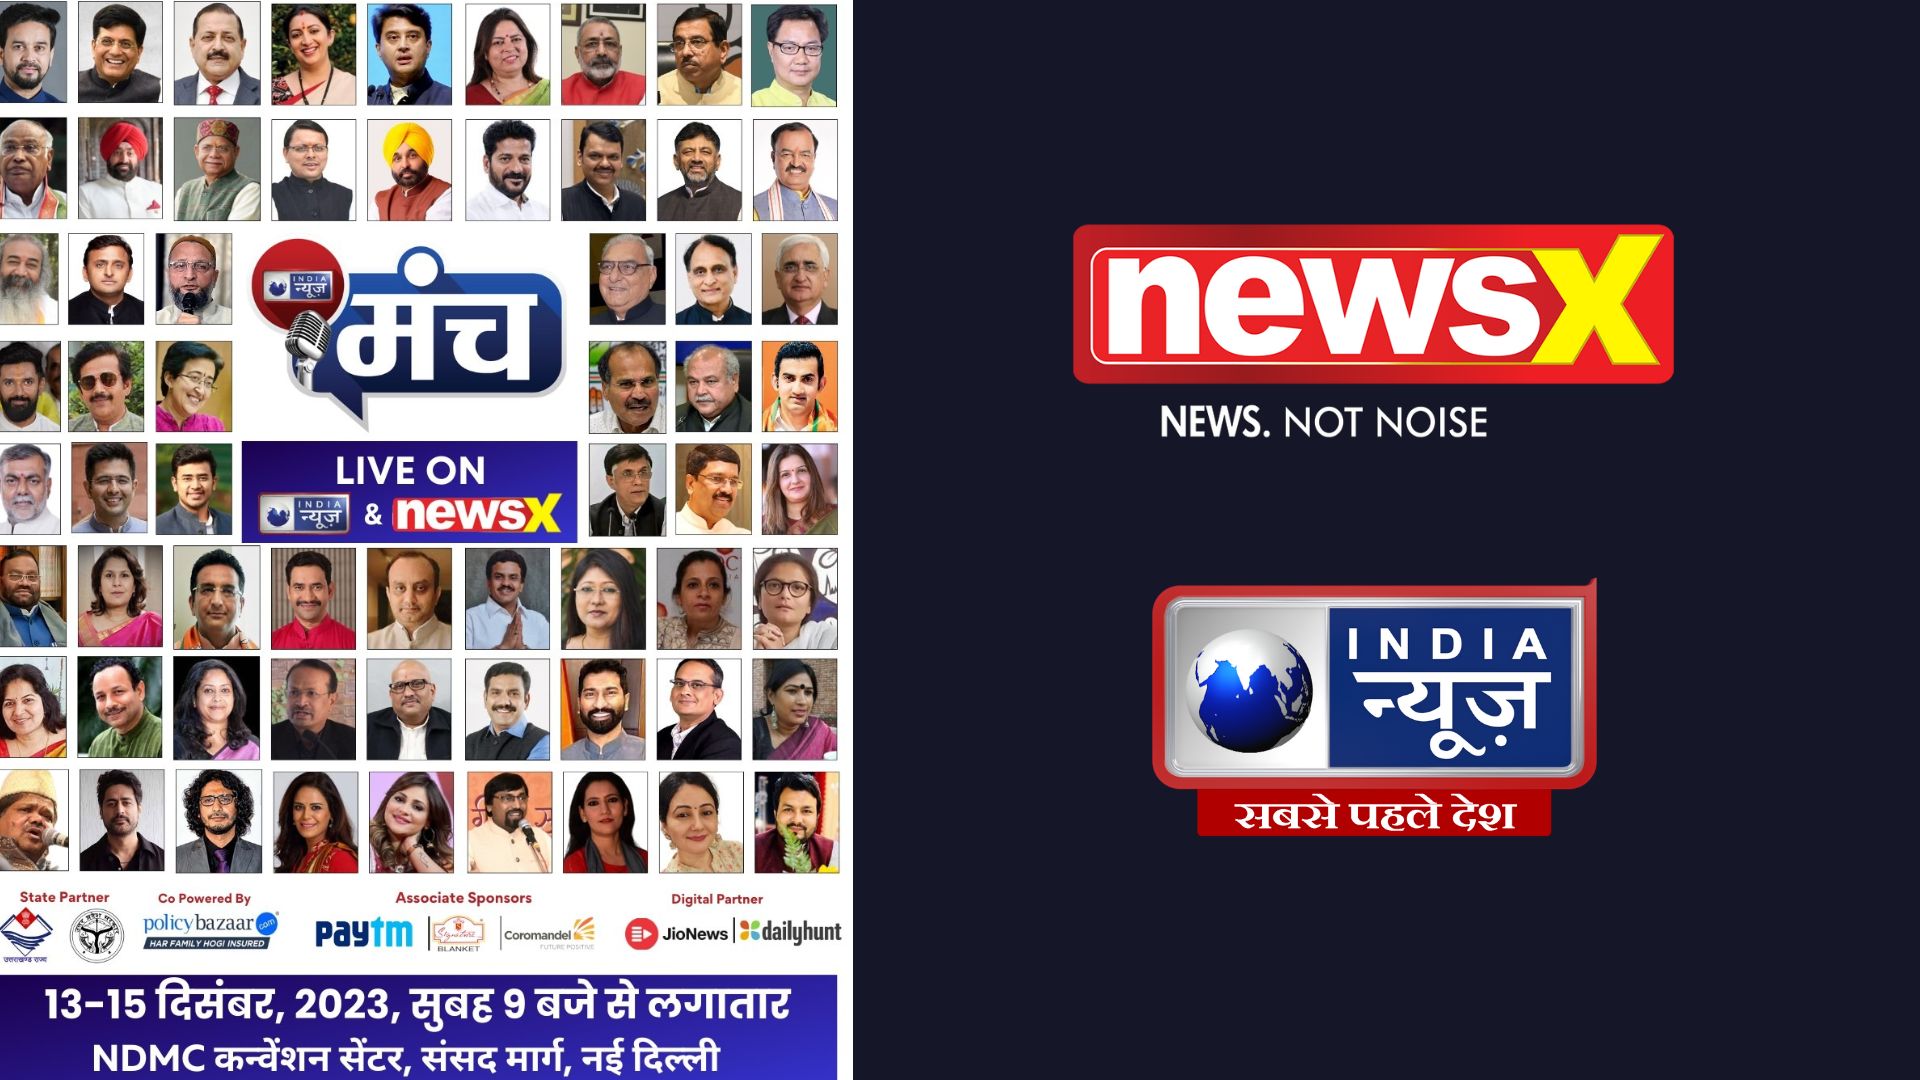 India News and News X Gear Up for Manch 2023; Biggest Discussion Platform Set to Commence in Delhi